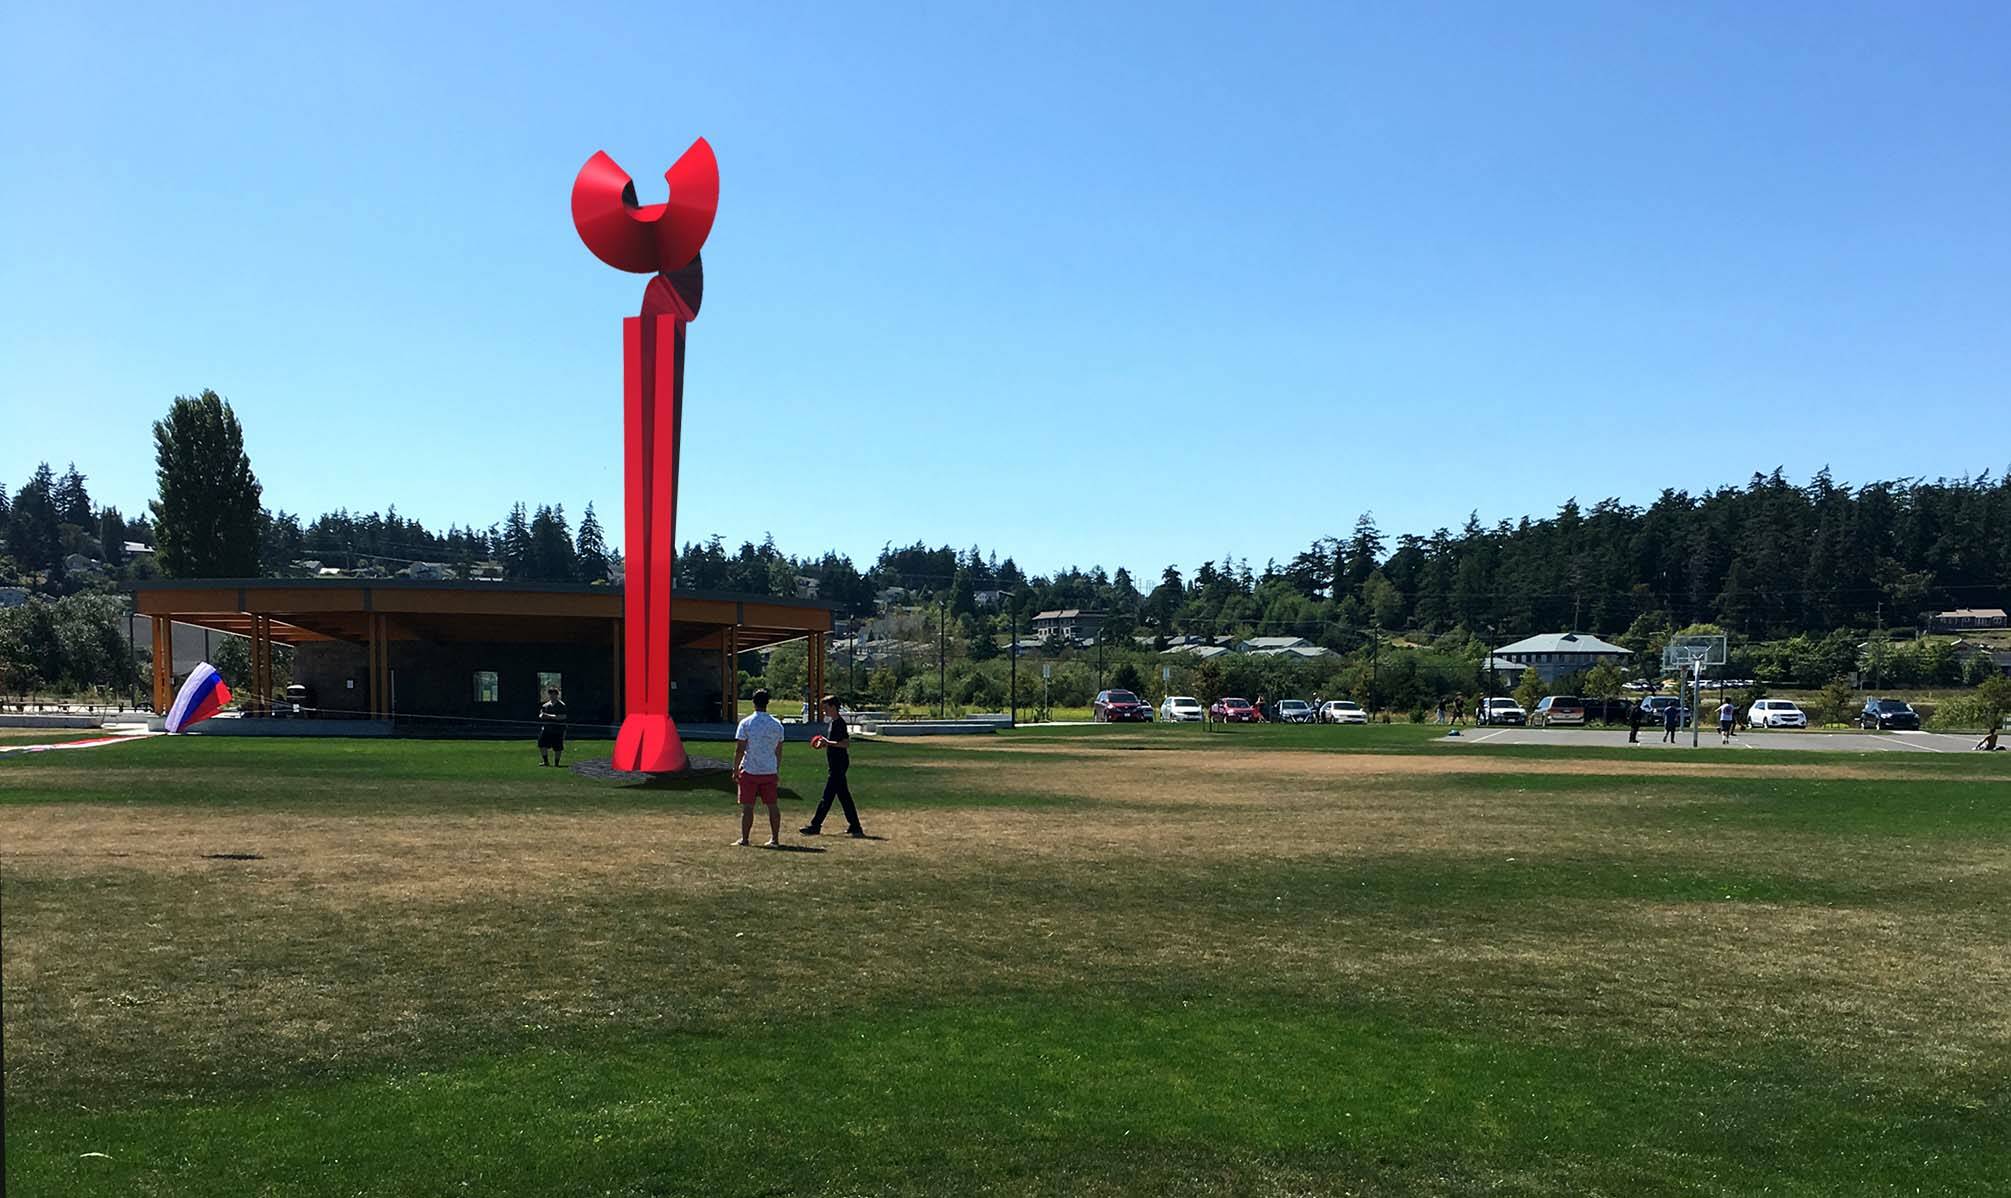 Rendering provided
An artist rendering of the 37-feet-tall “Angel de la Creatividad” in a proposed location in Windjammer Park. Oak Harbor City Council members approved two key agreements that move the art closer to the waterfront park after months of controversy.